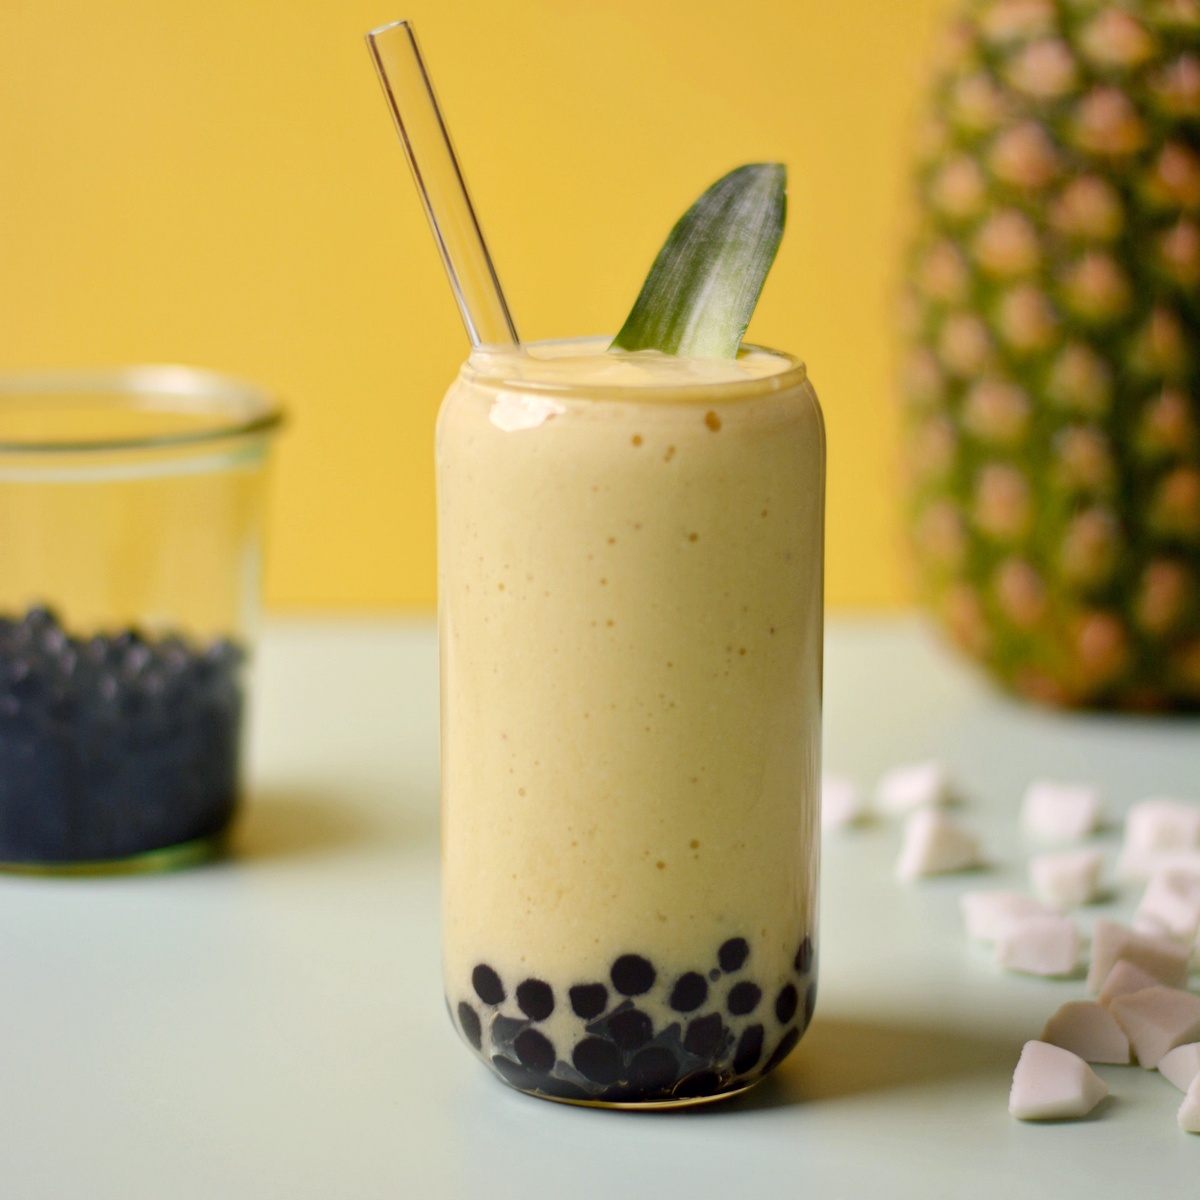 A glass cup with a yellow smoothie inside with black boba pearls in the bottom.